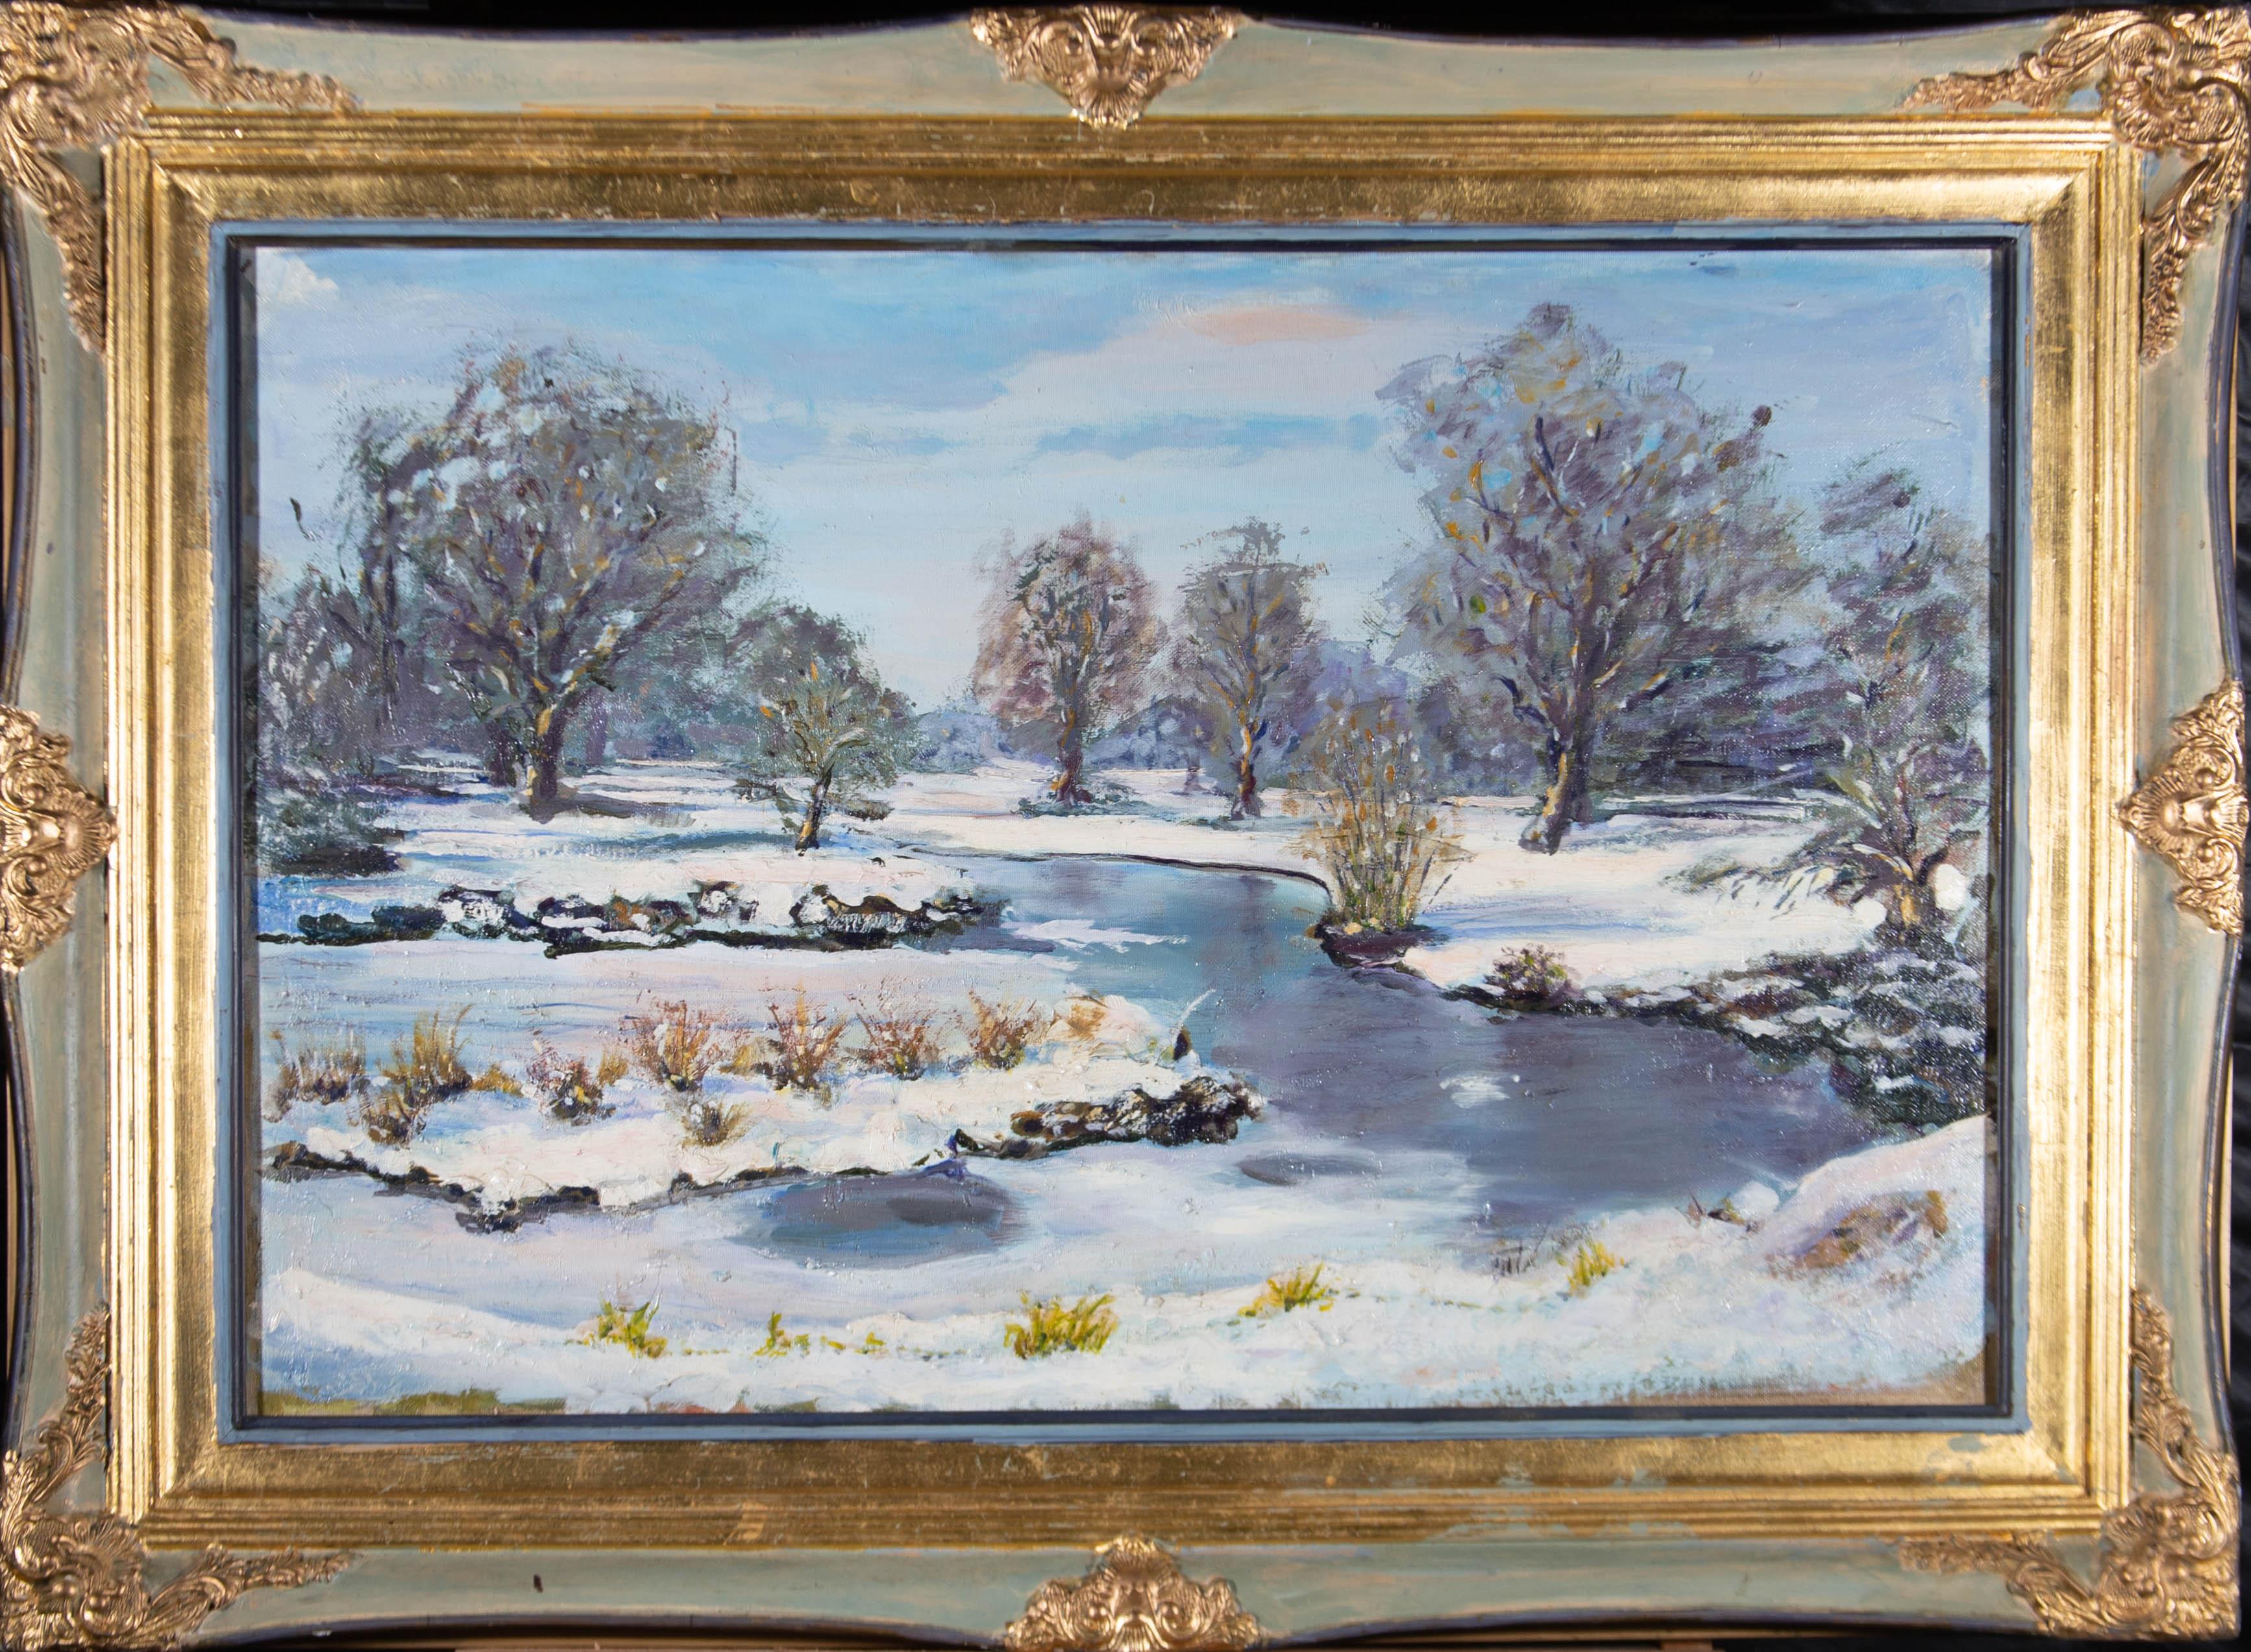 A textured oil showing a Winter landscape with a frozen stream running through snow covered fields. The painting is presented in a contemporary gilt and blue painted frame with swept corners and rail. There is a label at the reverse with the